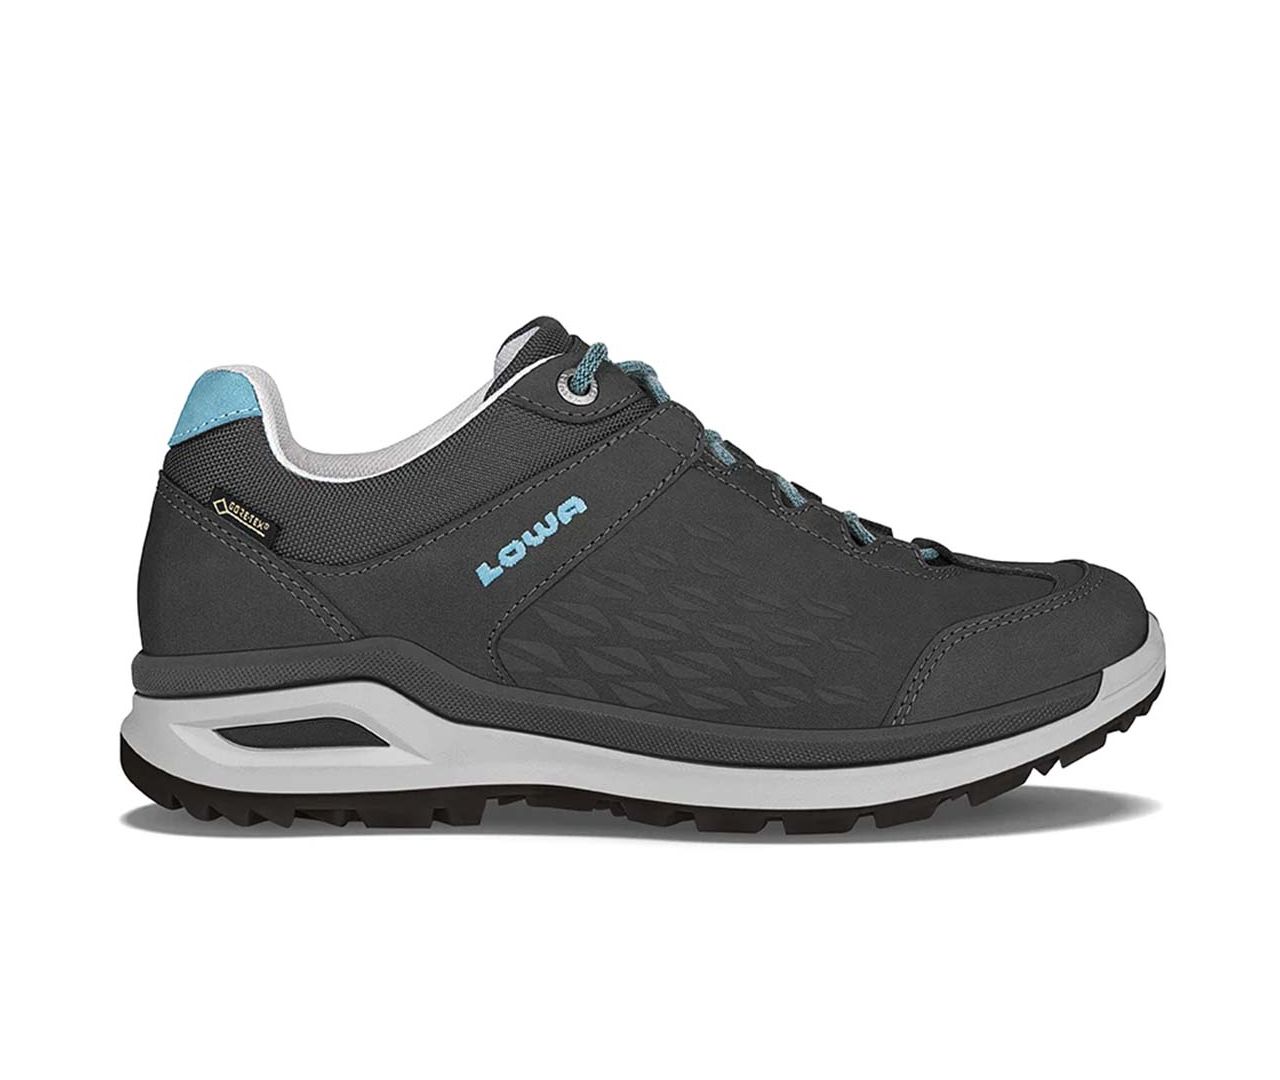 Nageslacht Preventie verdamping LOWA Locarno Gtx LO - Anthracite/turquoise